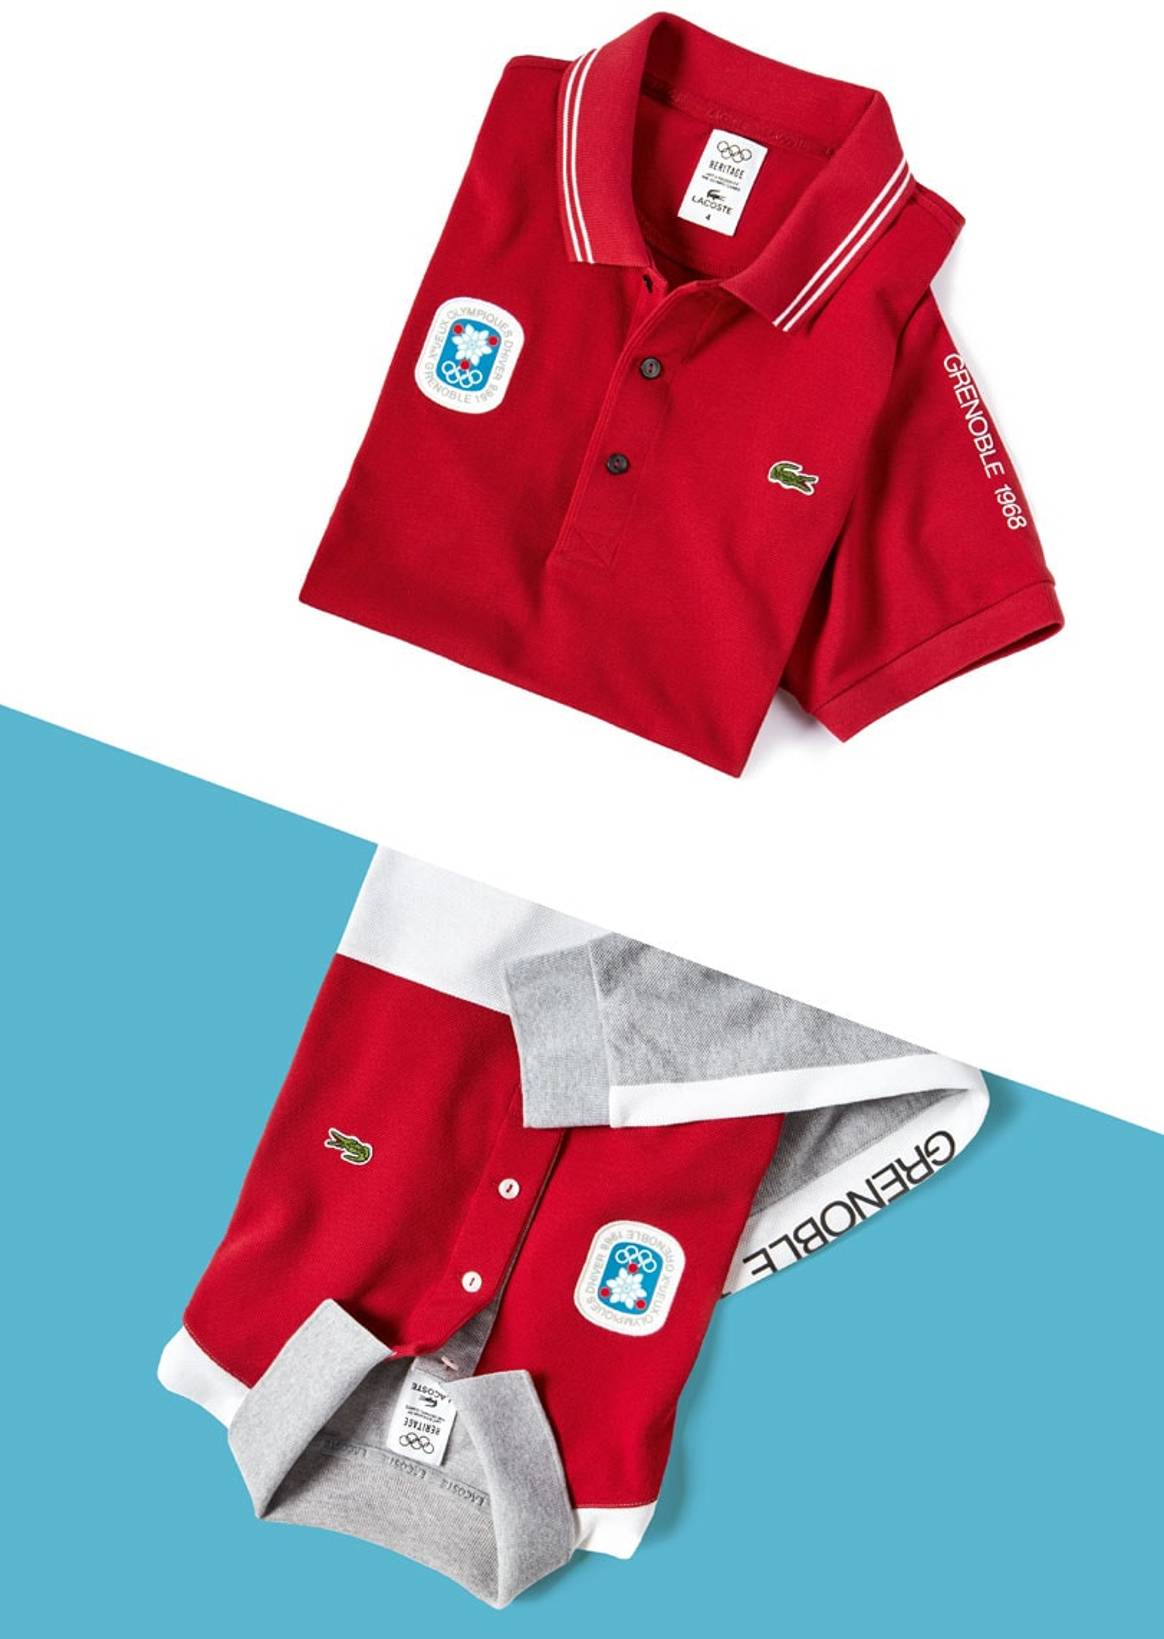 Lacoste celebrates Olympic heritage with new apparel line